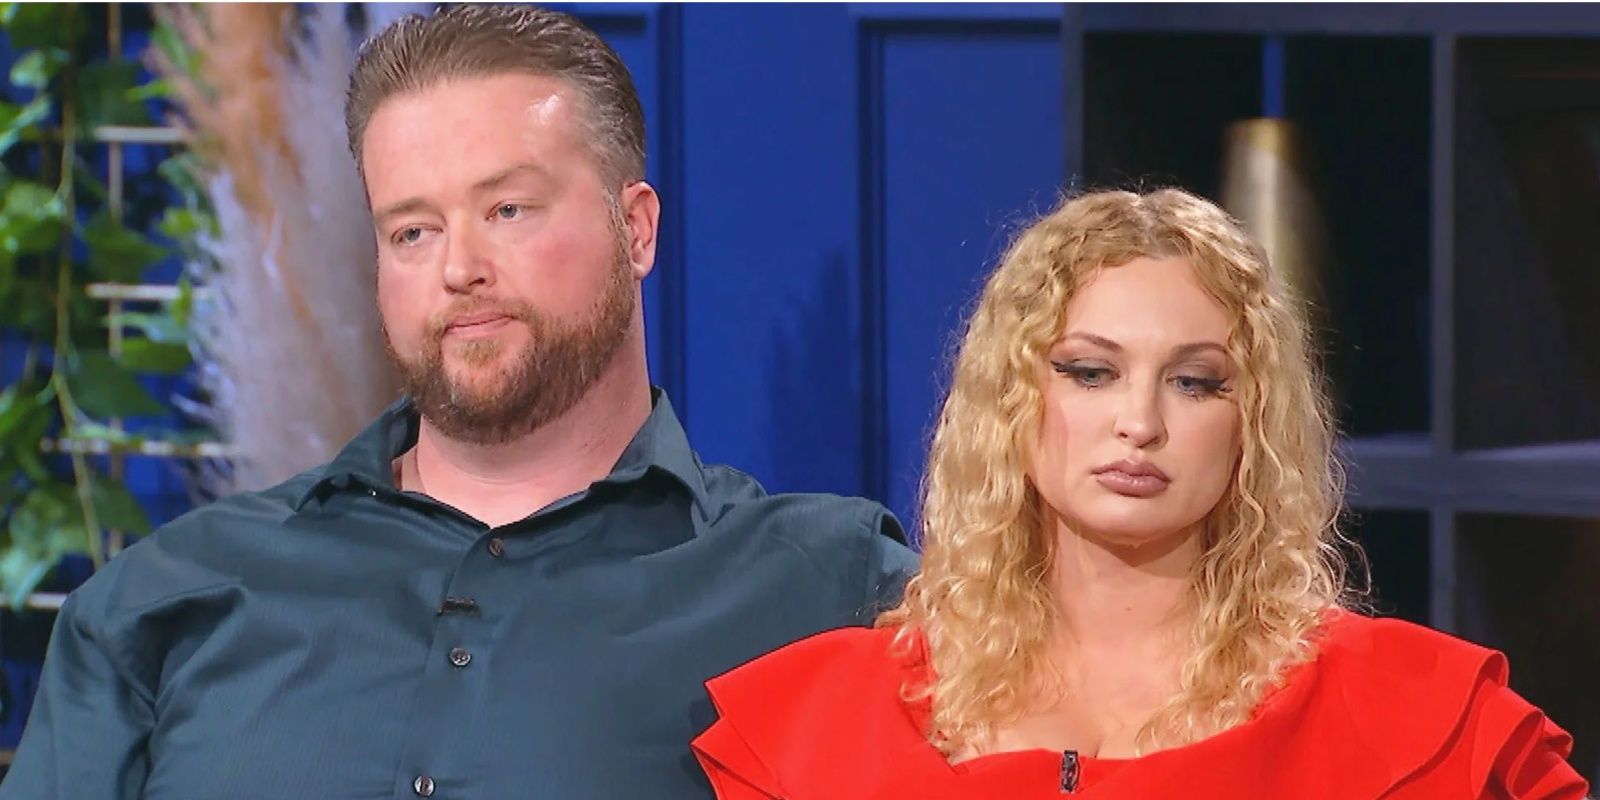 90 day Fiance's Mike Youngquist & Natalie Mordovtseva looking annoyed